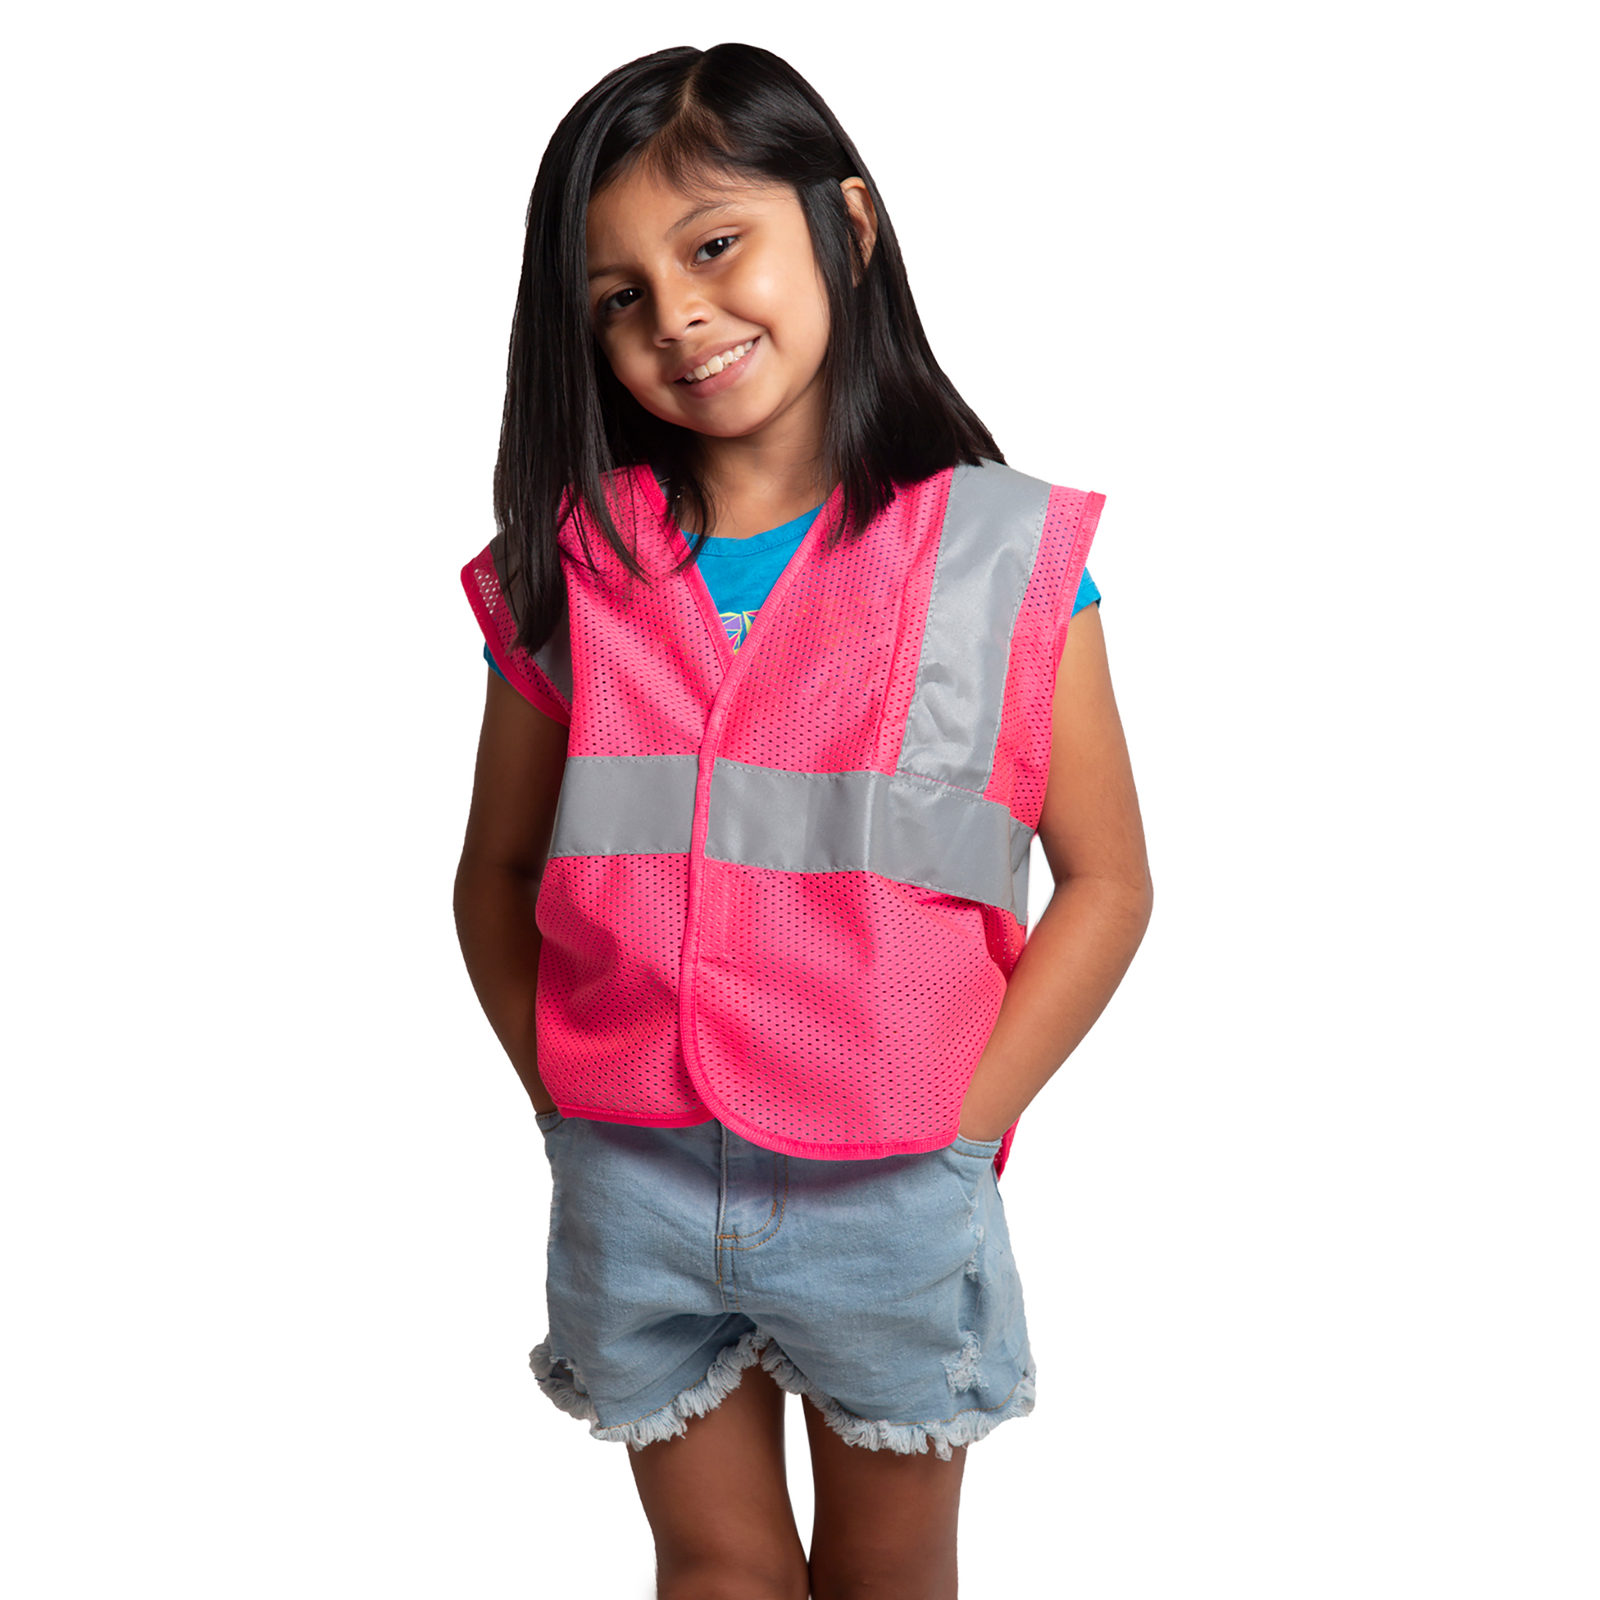 Girl wearing the JORESTECH pink Children's hi-vis mesh safety vest with 2 inches reflective strips